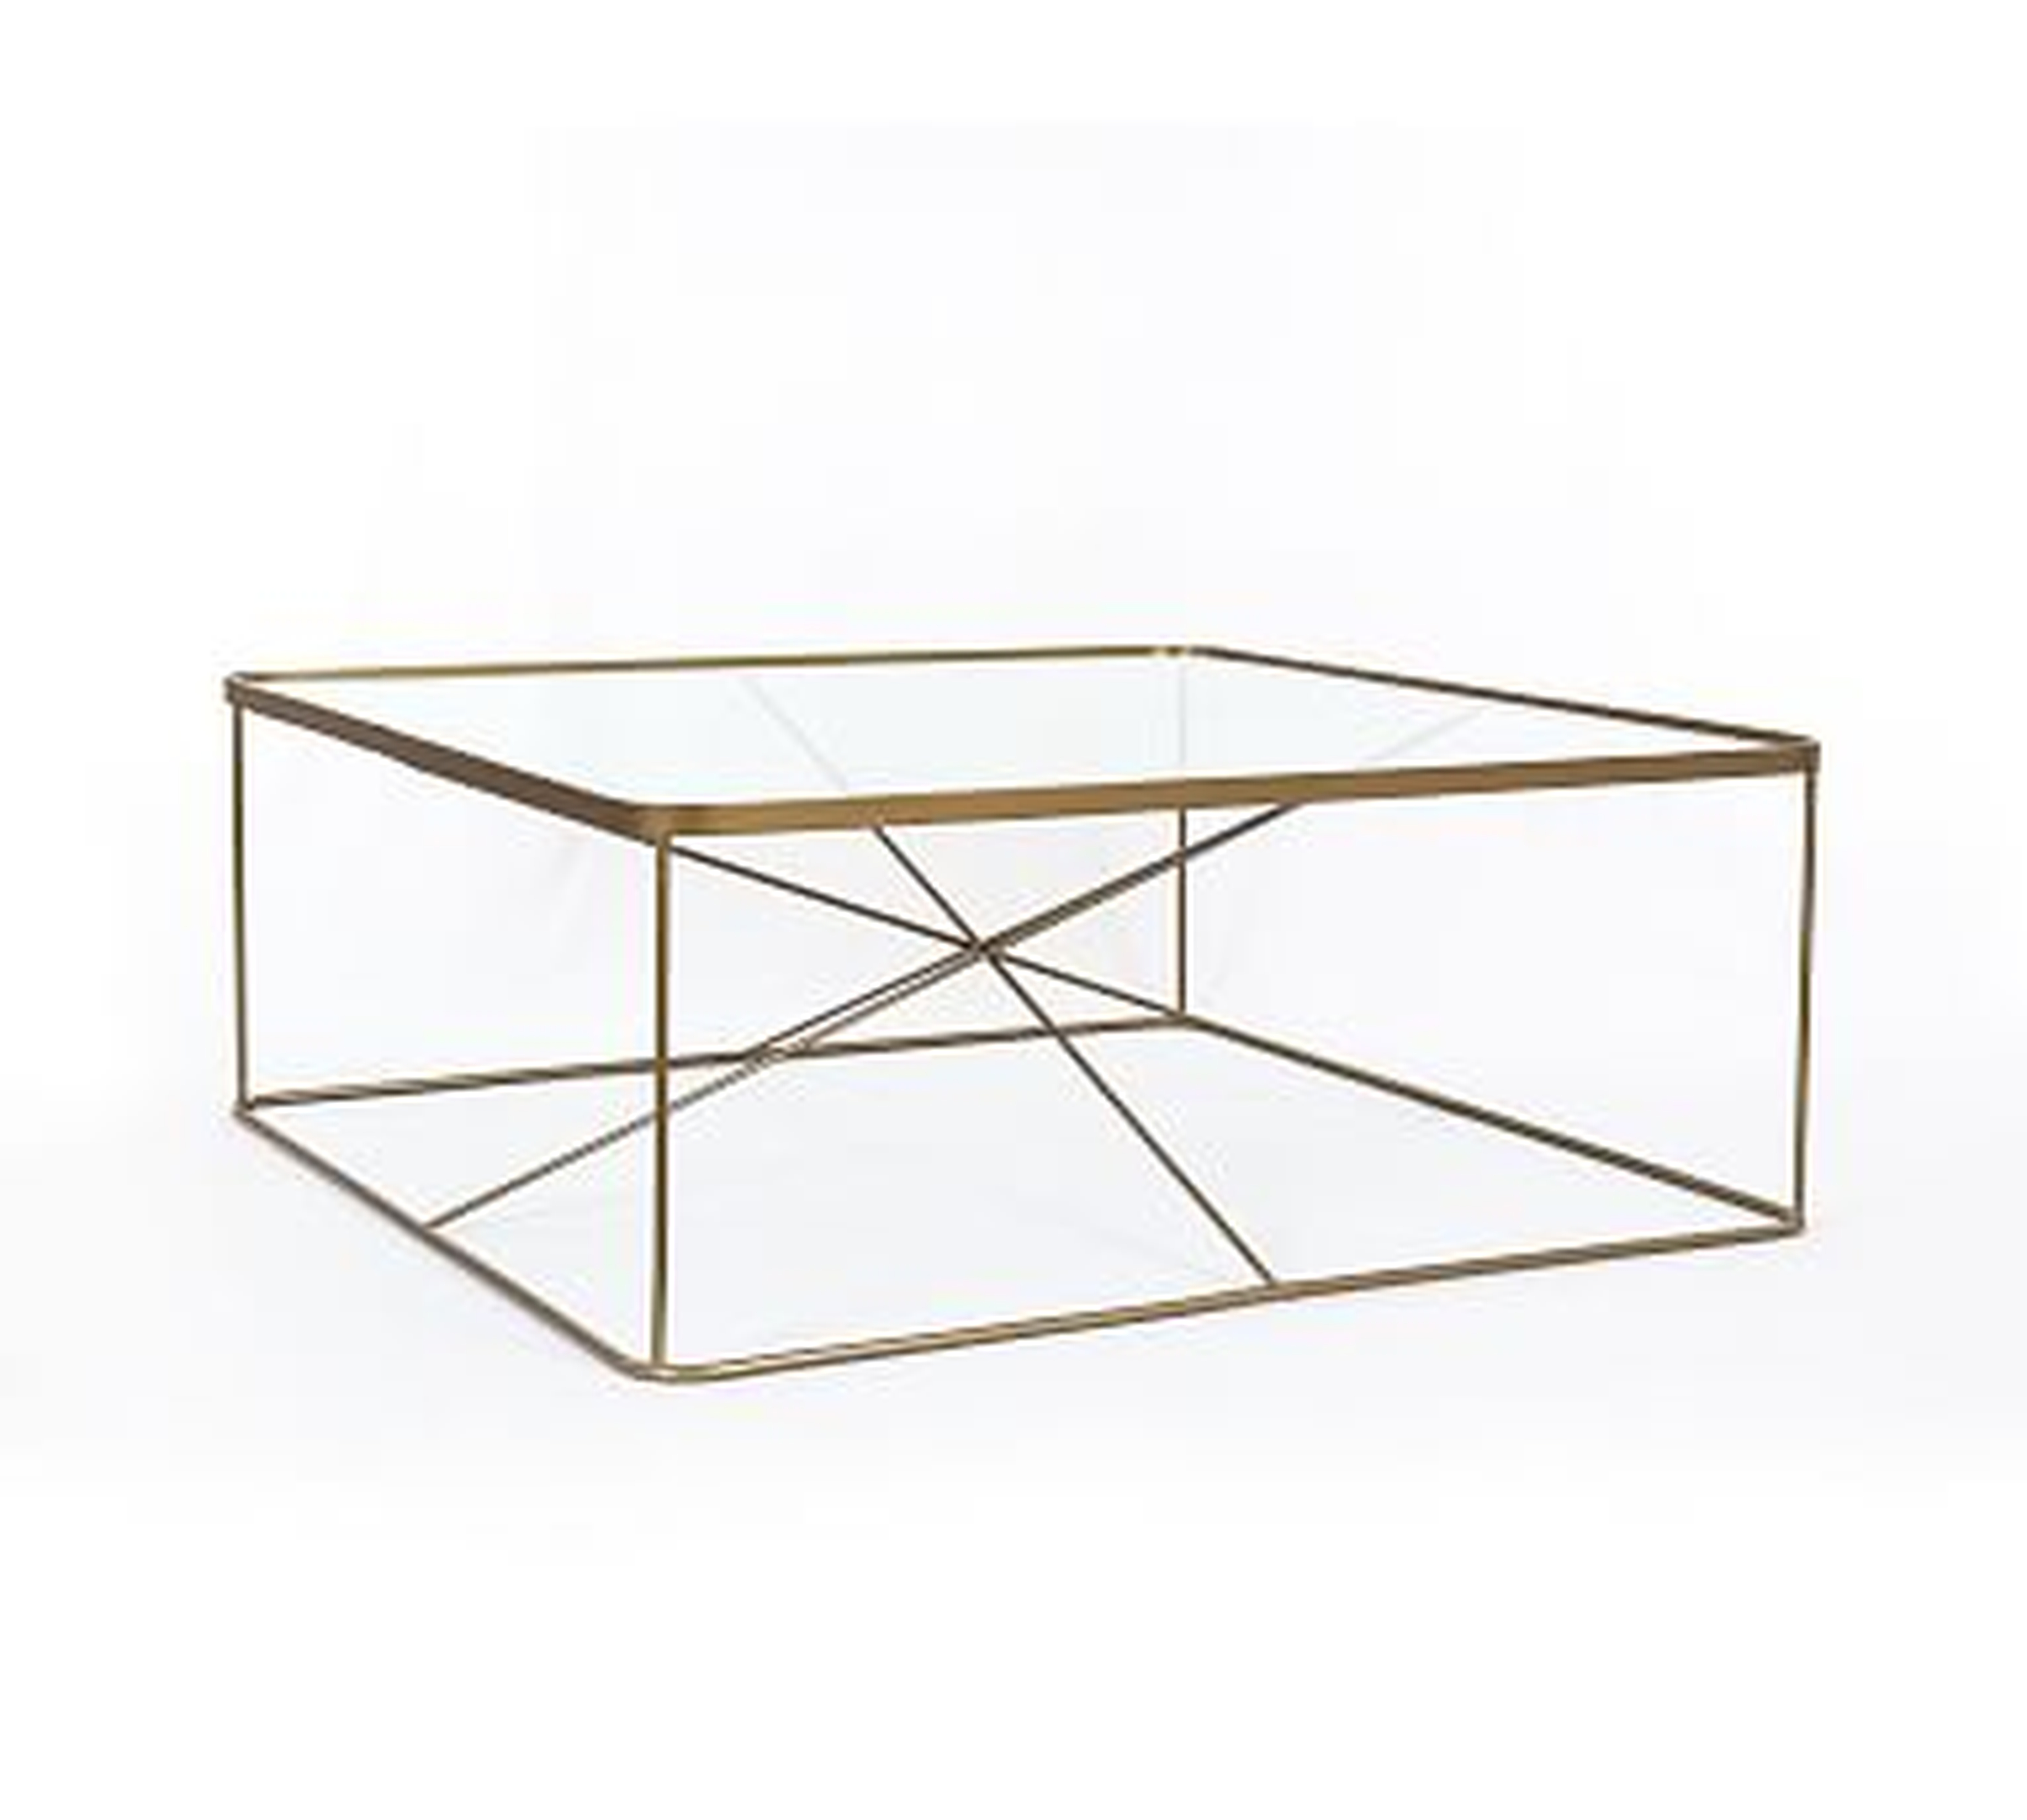 Aiken Square Coffee Table, Antique Brass - Pottery Barn